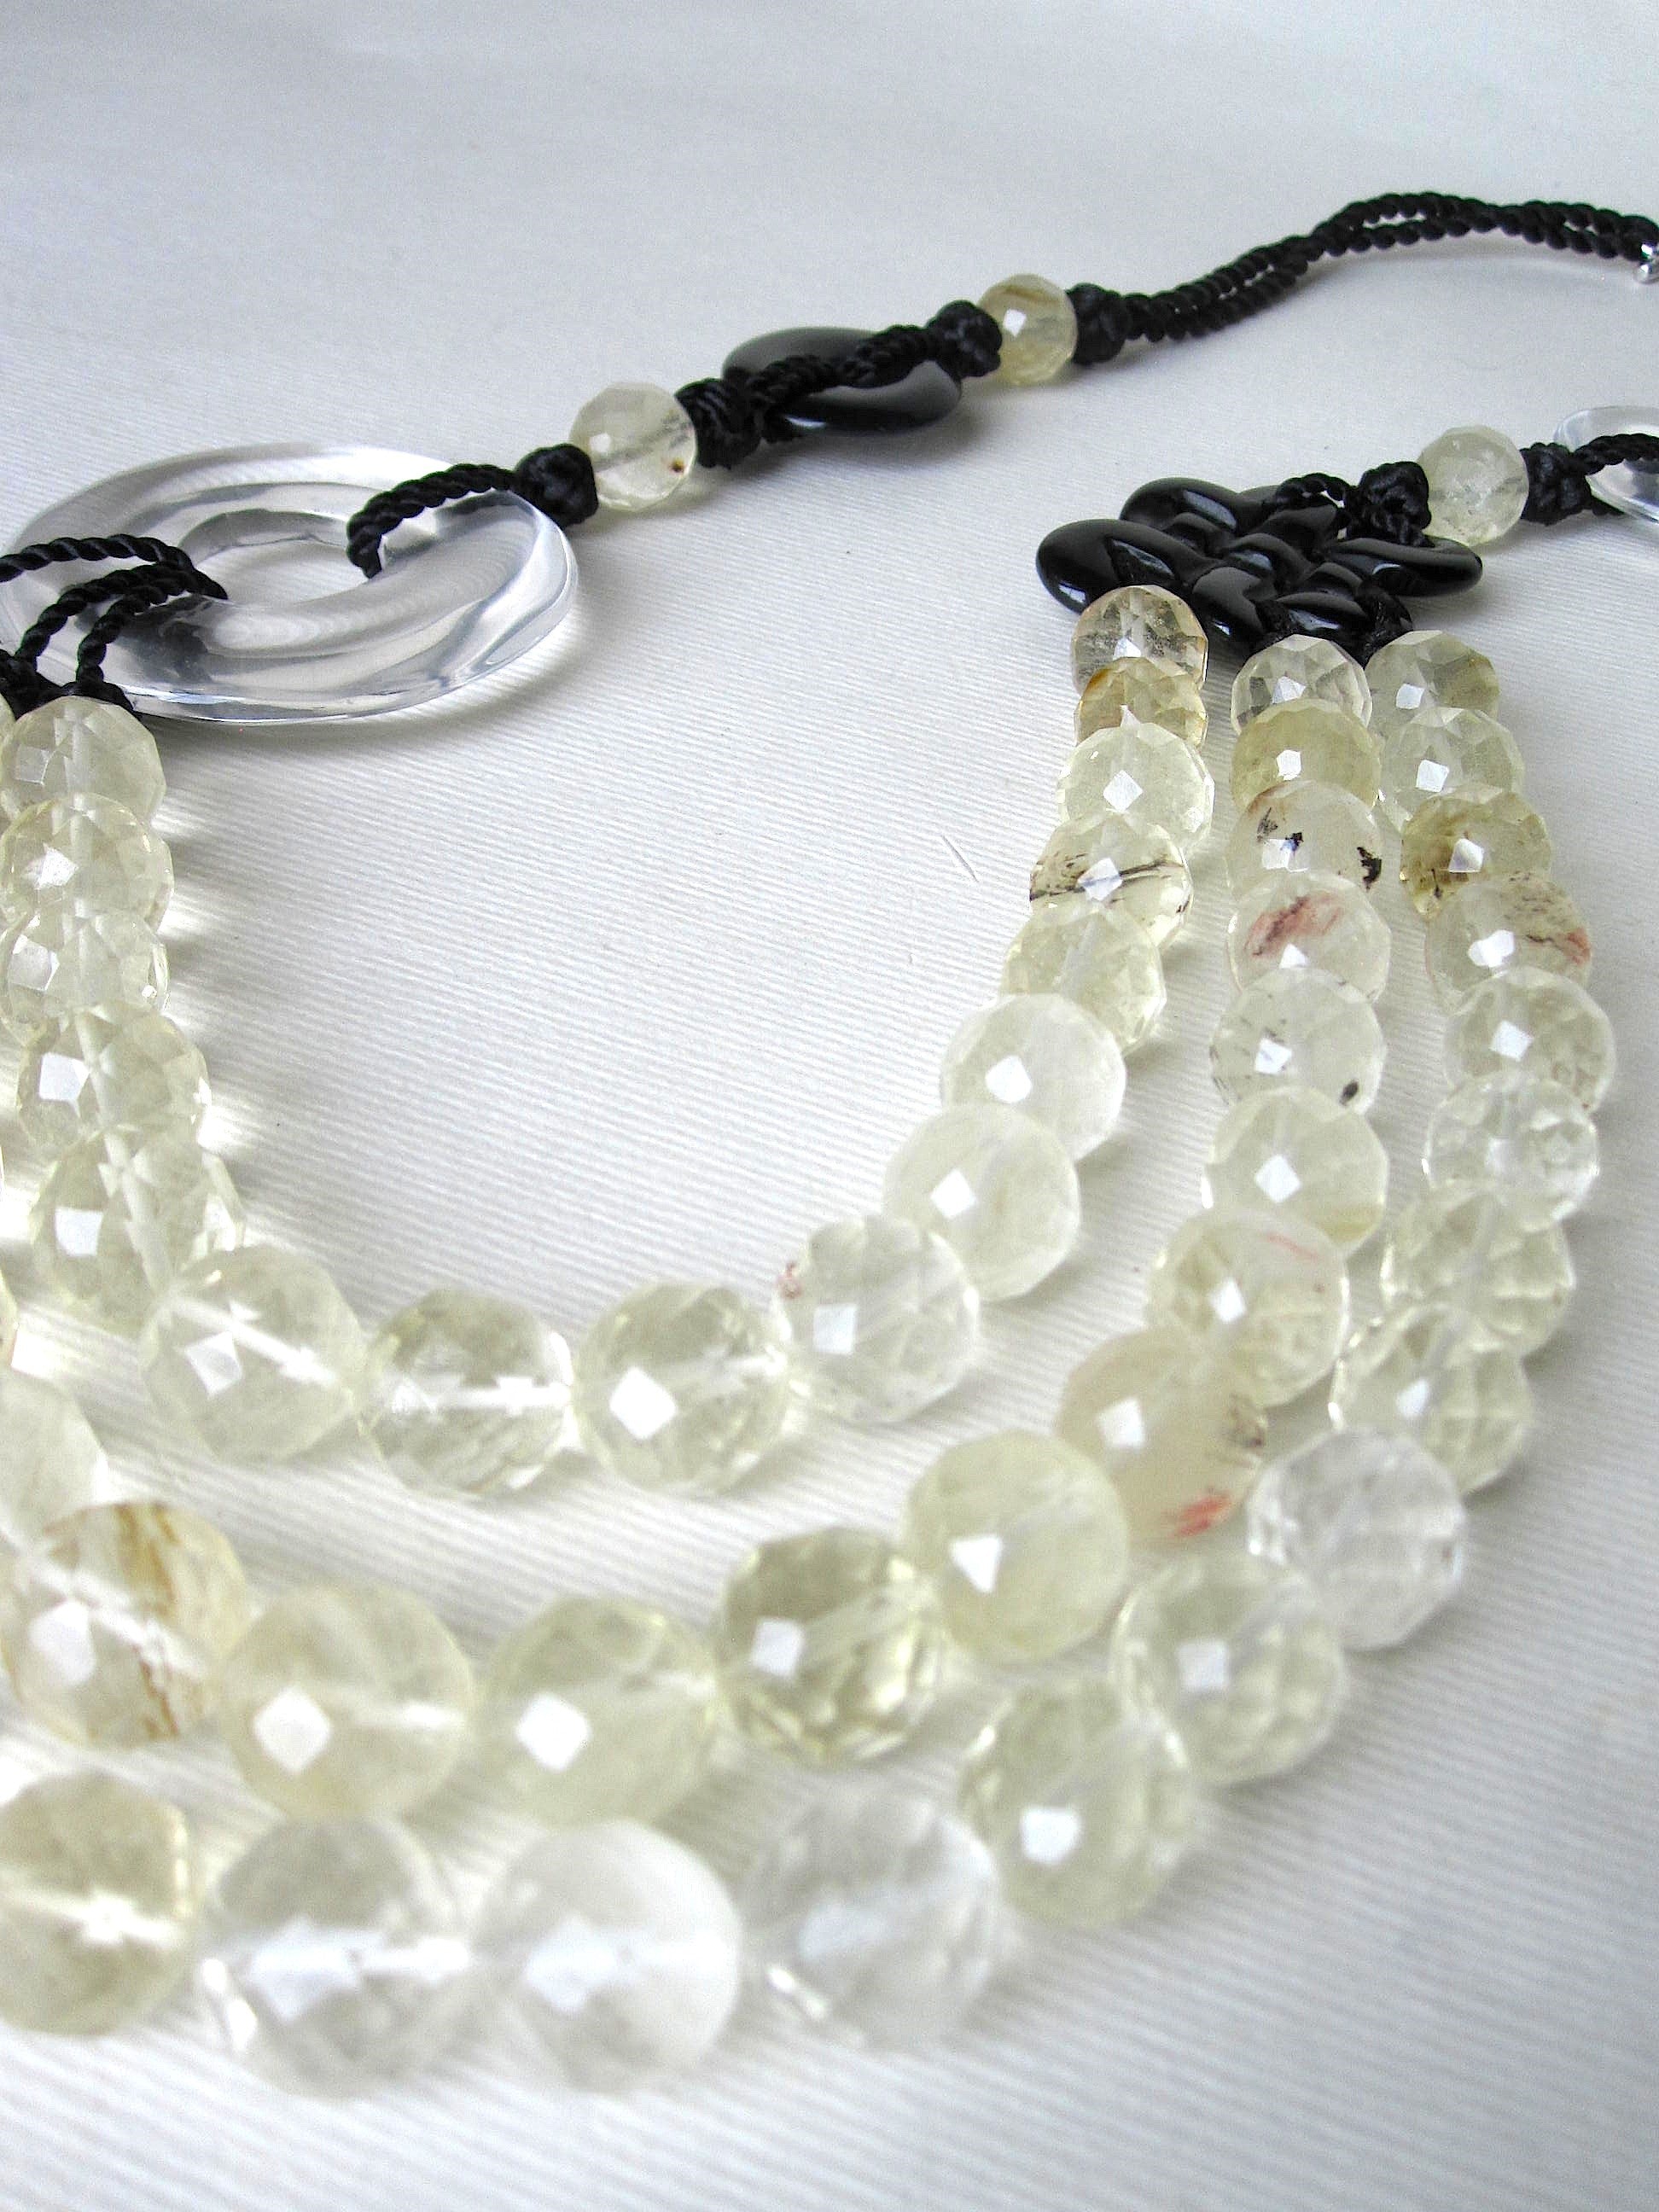 Cherry Quartz Beads Clear Crystal Disc, Black Agate, Black Chinese Silk Knots Necklace